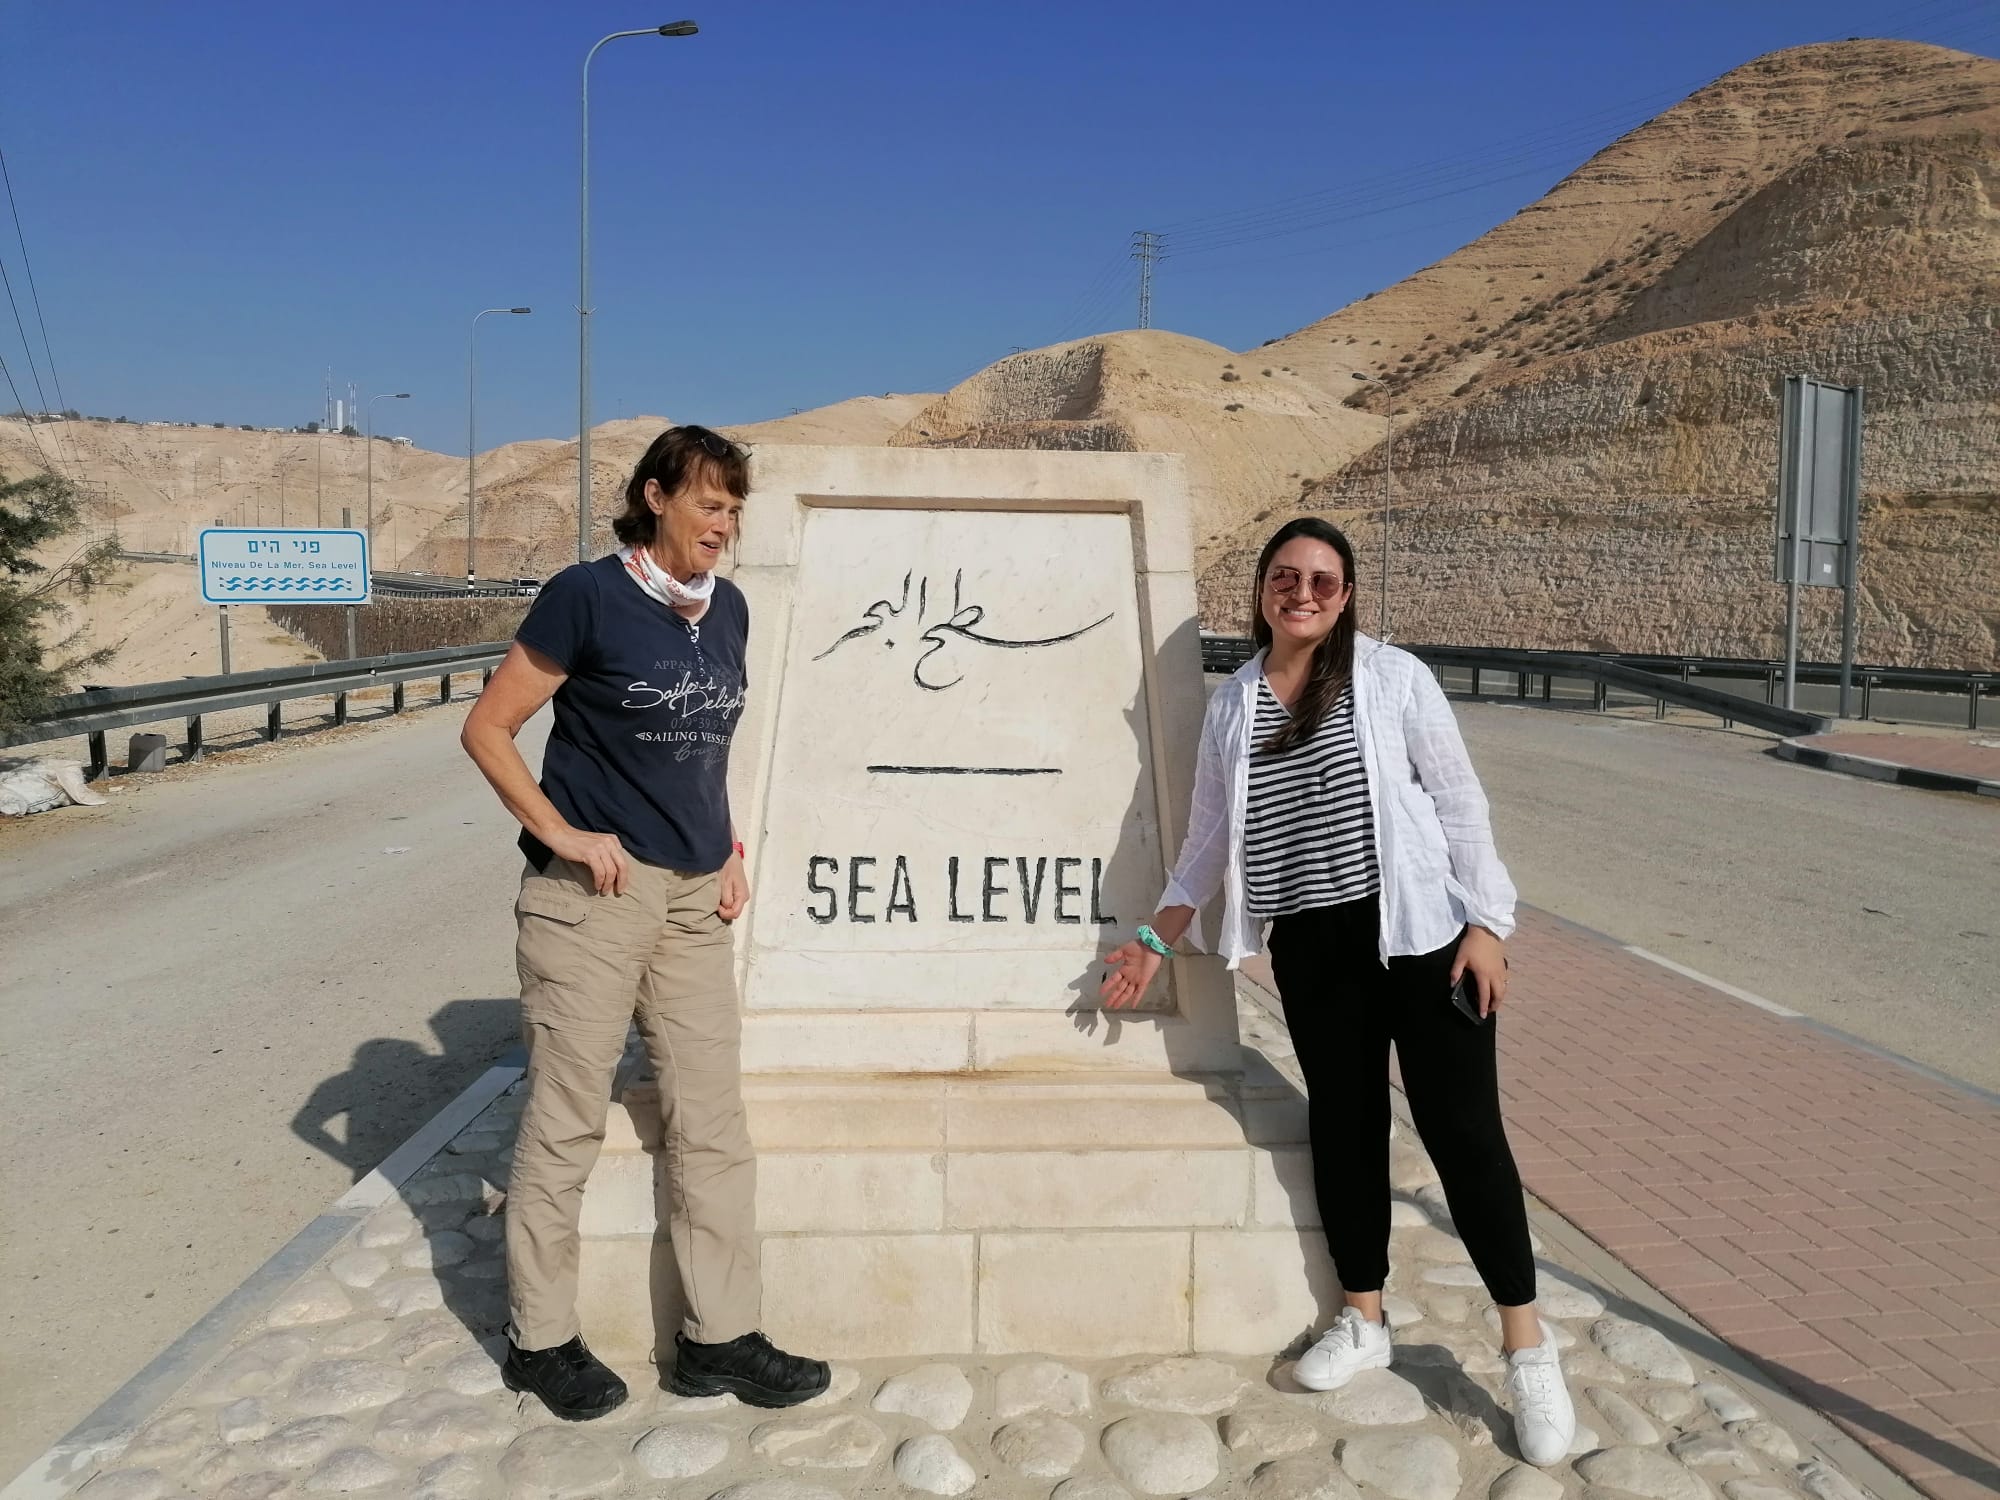 Sea Level Sign, on the way to the Dead Sea